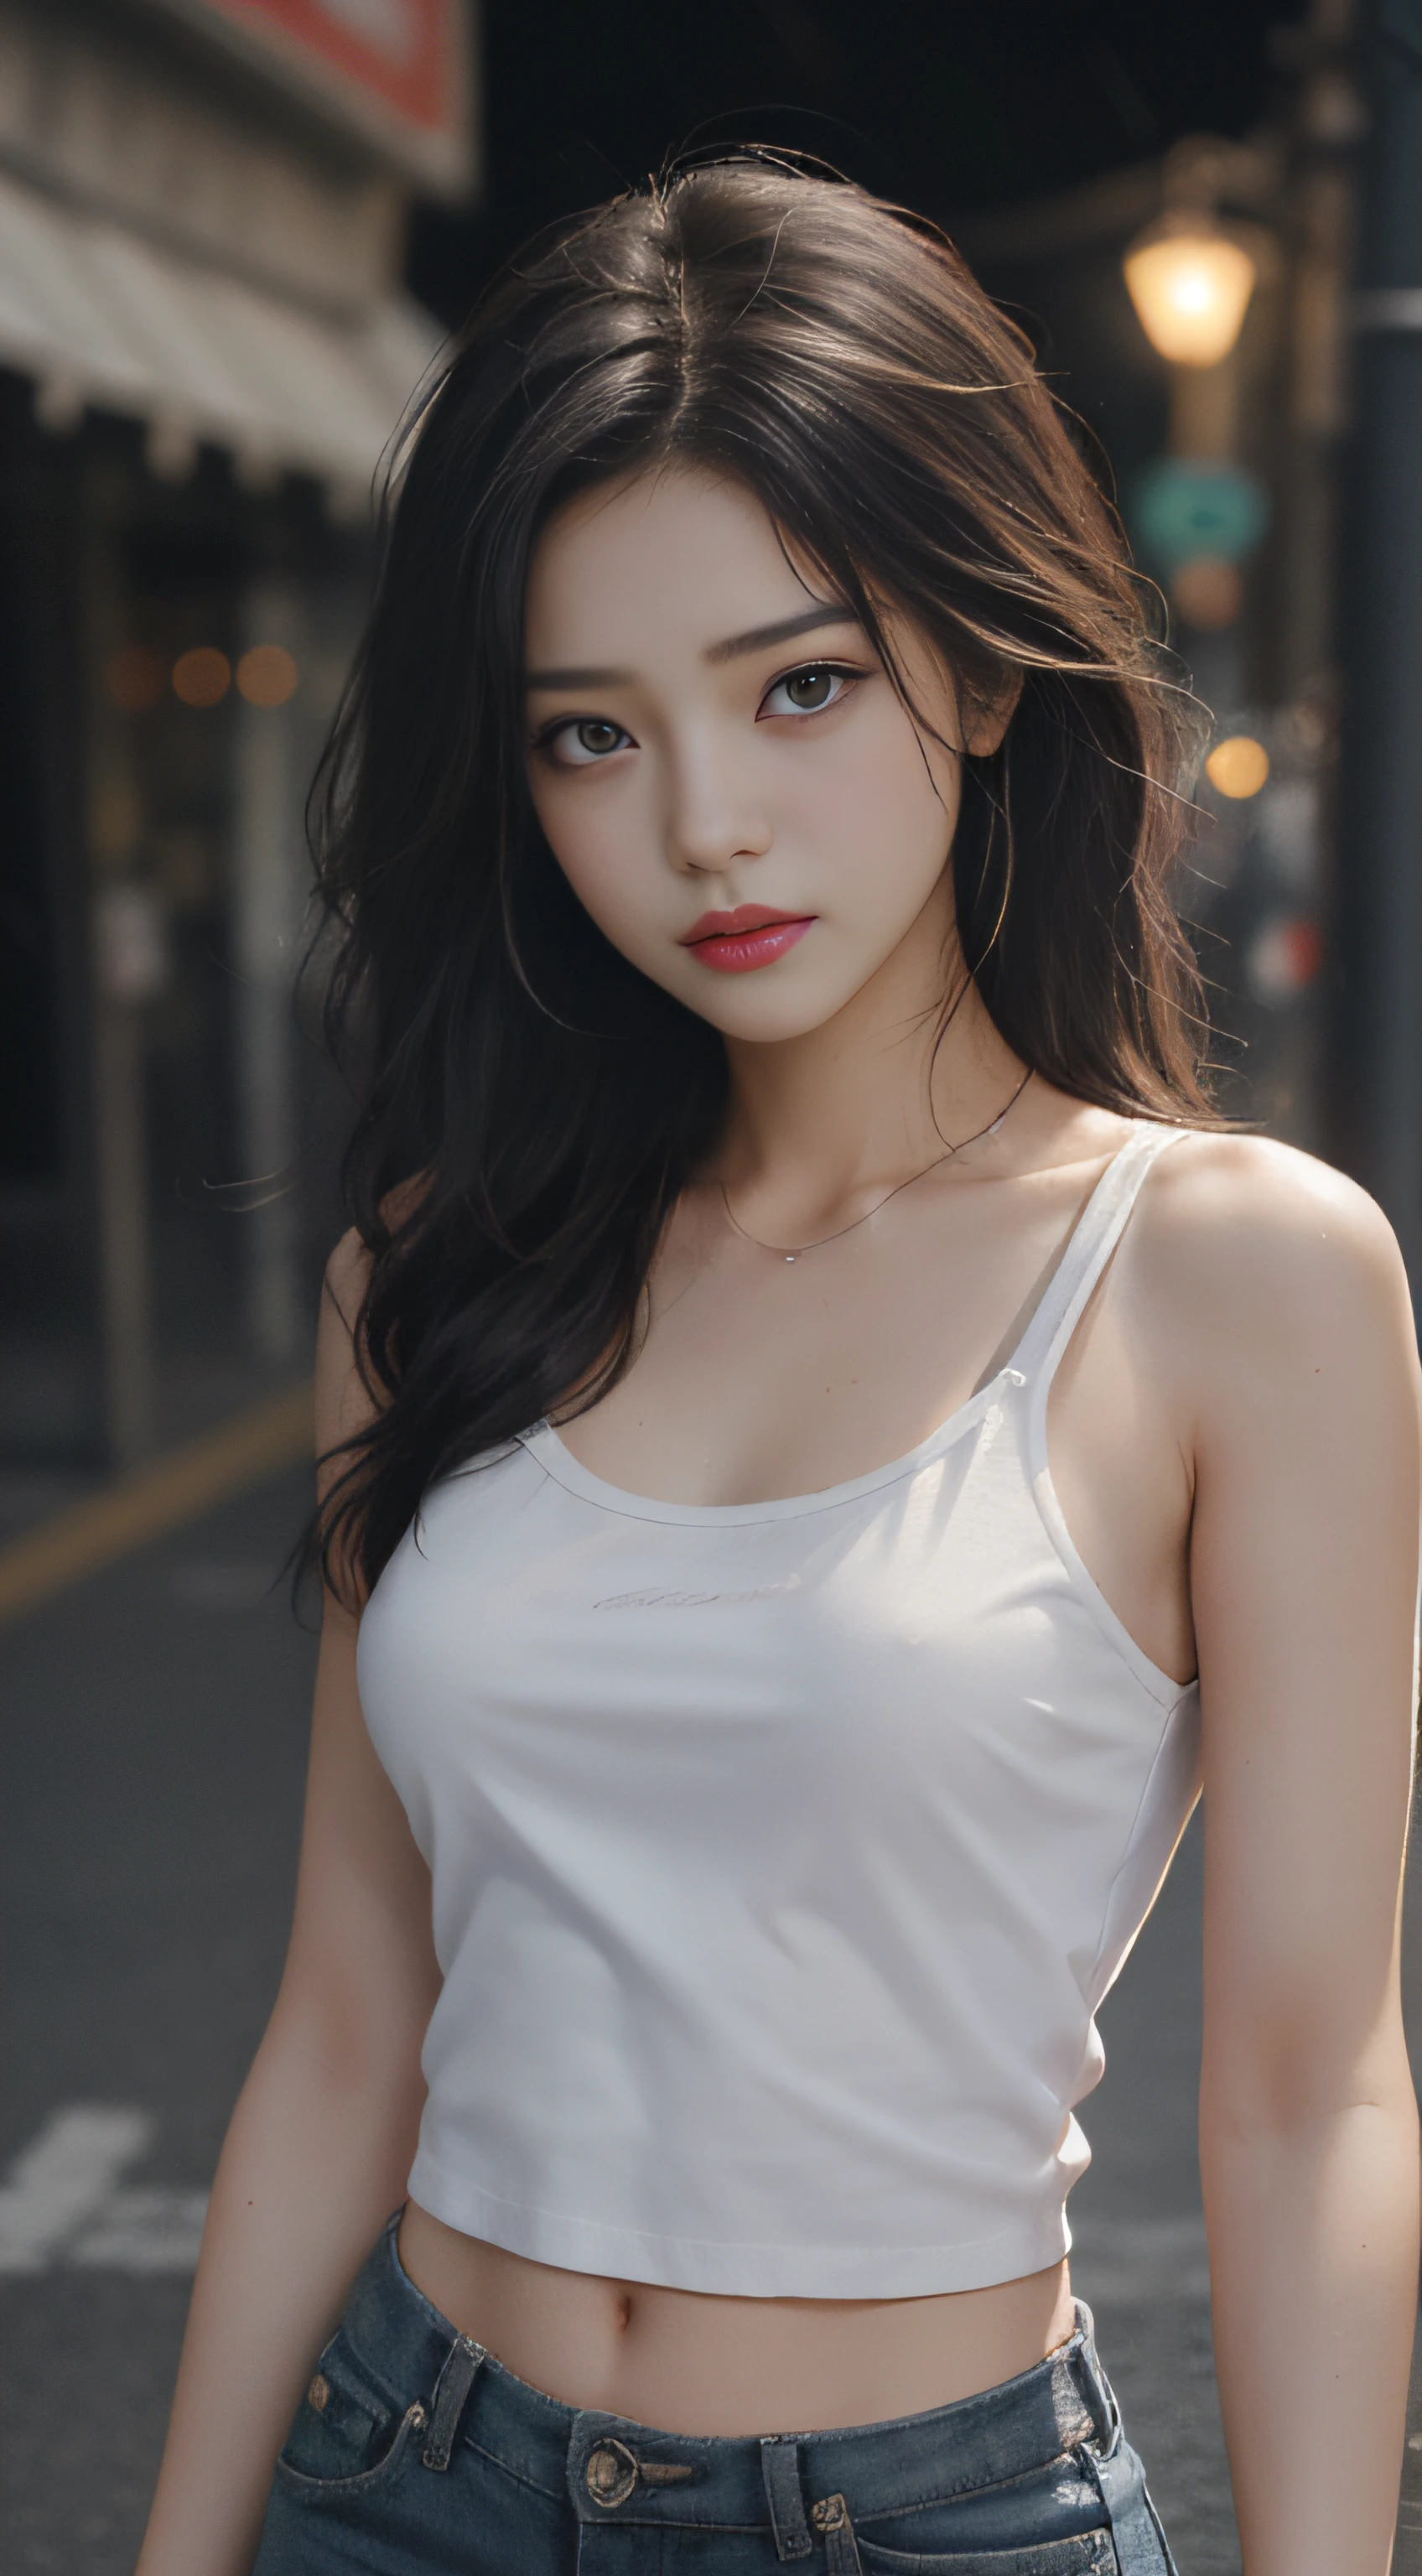 ((Best quality, 8K, Masterpiece :1.3)), Sharp focus :1.2, perfect figure beautiful woman:1.4, Slim abs:1.2, ((Layered Hair Style,)), (Tank top shirt:1.1 ), (the street:1.2), Highly detailed facial and skin texture, A detailed eye, double eyelid,（torn laundry：1.5）， Best Picture Quality， tmasterpiece， Ultra-high resolution， （fidelity：1.4）， photore， 1 girl，[（grieves）]，white  shirt， dimly lit， darkly， be desperate， pitying， cute little， cinematic ligh， tears， tear drop， （torn laundry：1.5）， （wetclothes：1.4）， exposed bare shoulders， Real rain， Wet hair,inner colored